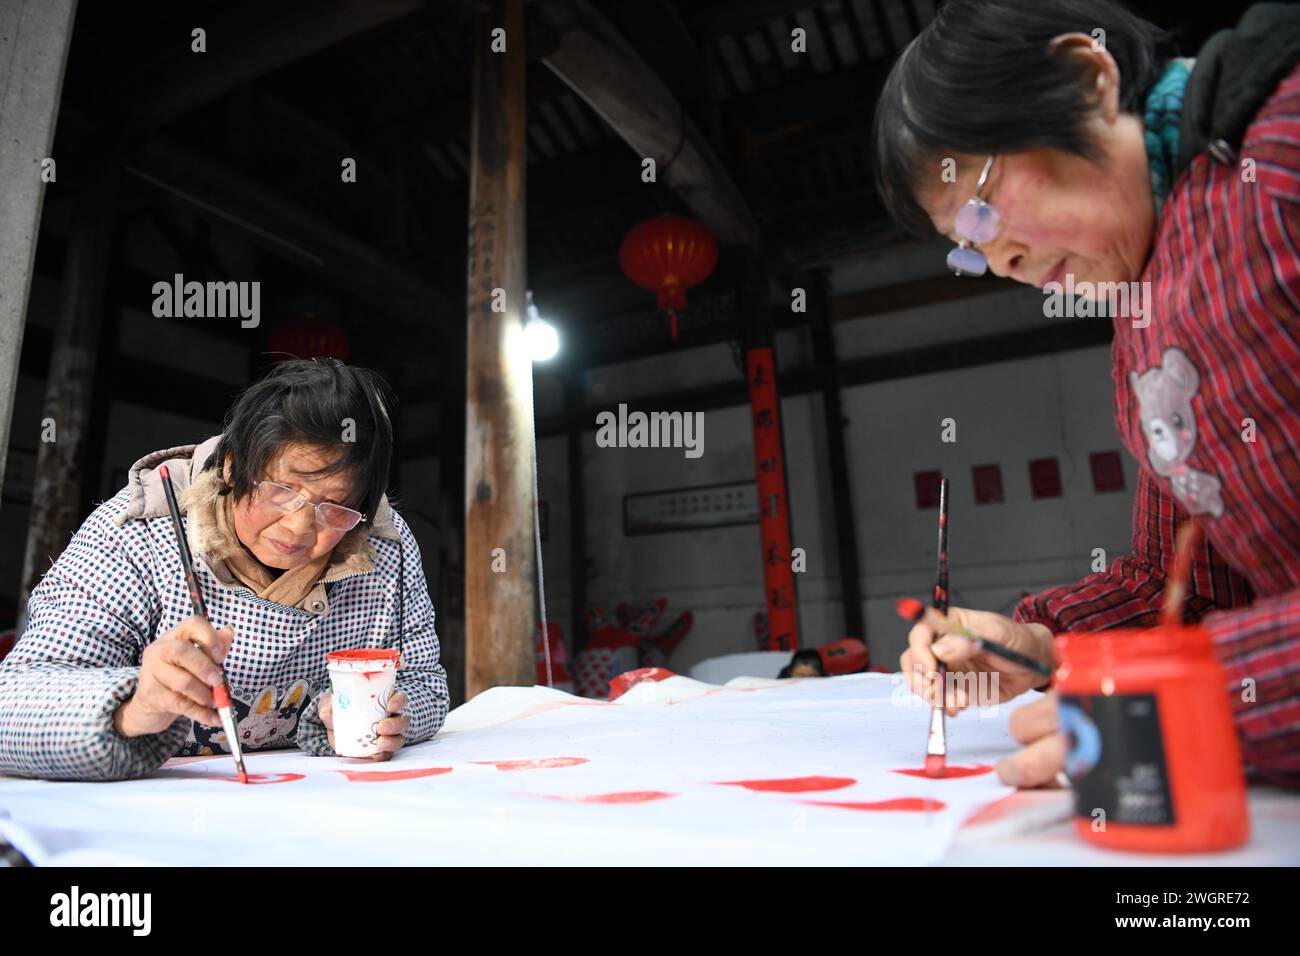 (240206) -- SHEXIAN, Feb. 6, 2024 (Xinhua) -- Local residents make fish-shaped lanterns in Zhanqi Village of Shexian County, Huangshan City, east China's Anhui Province, Feb. 4, 2024. The parade with fish-shaped lanterns is an important folk cultural activity in Shexian County. Every year, in the first month of Chinese lunar calendar, it attracts tourists from all over the country.   Born in 1996, Wang Yufang is an inheritor of fish-shaped lantern making skills, an intangible cultural heritage. Wang started to learn the skills from local villagers when he was 12 years old.     Wang now runs a Stock Photo